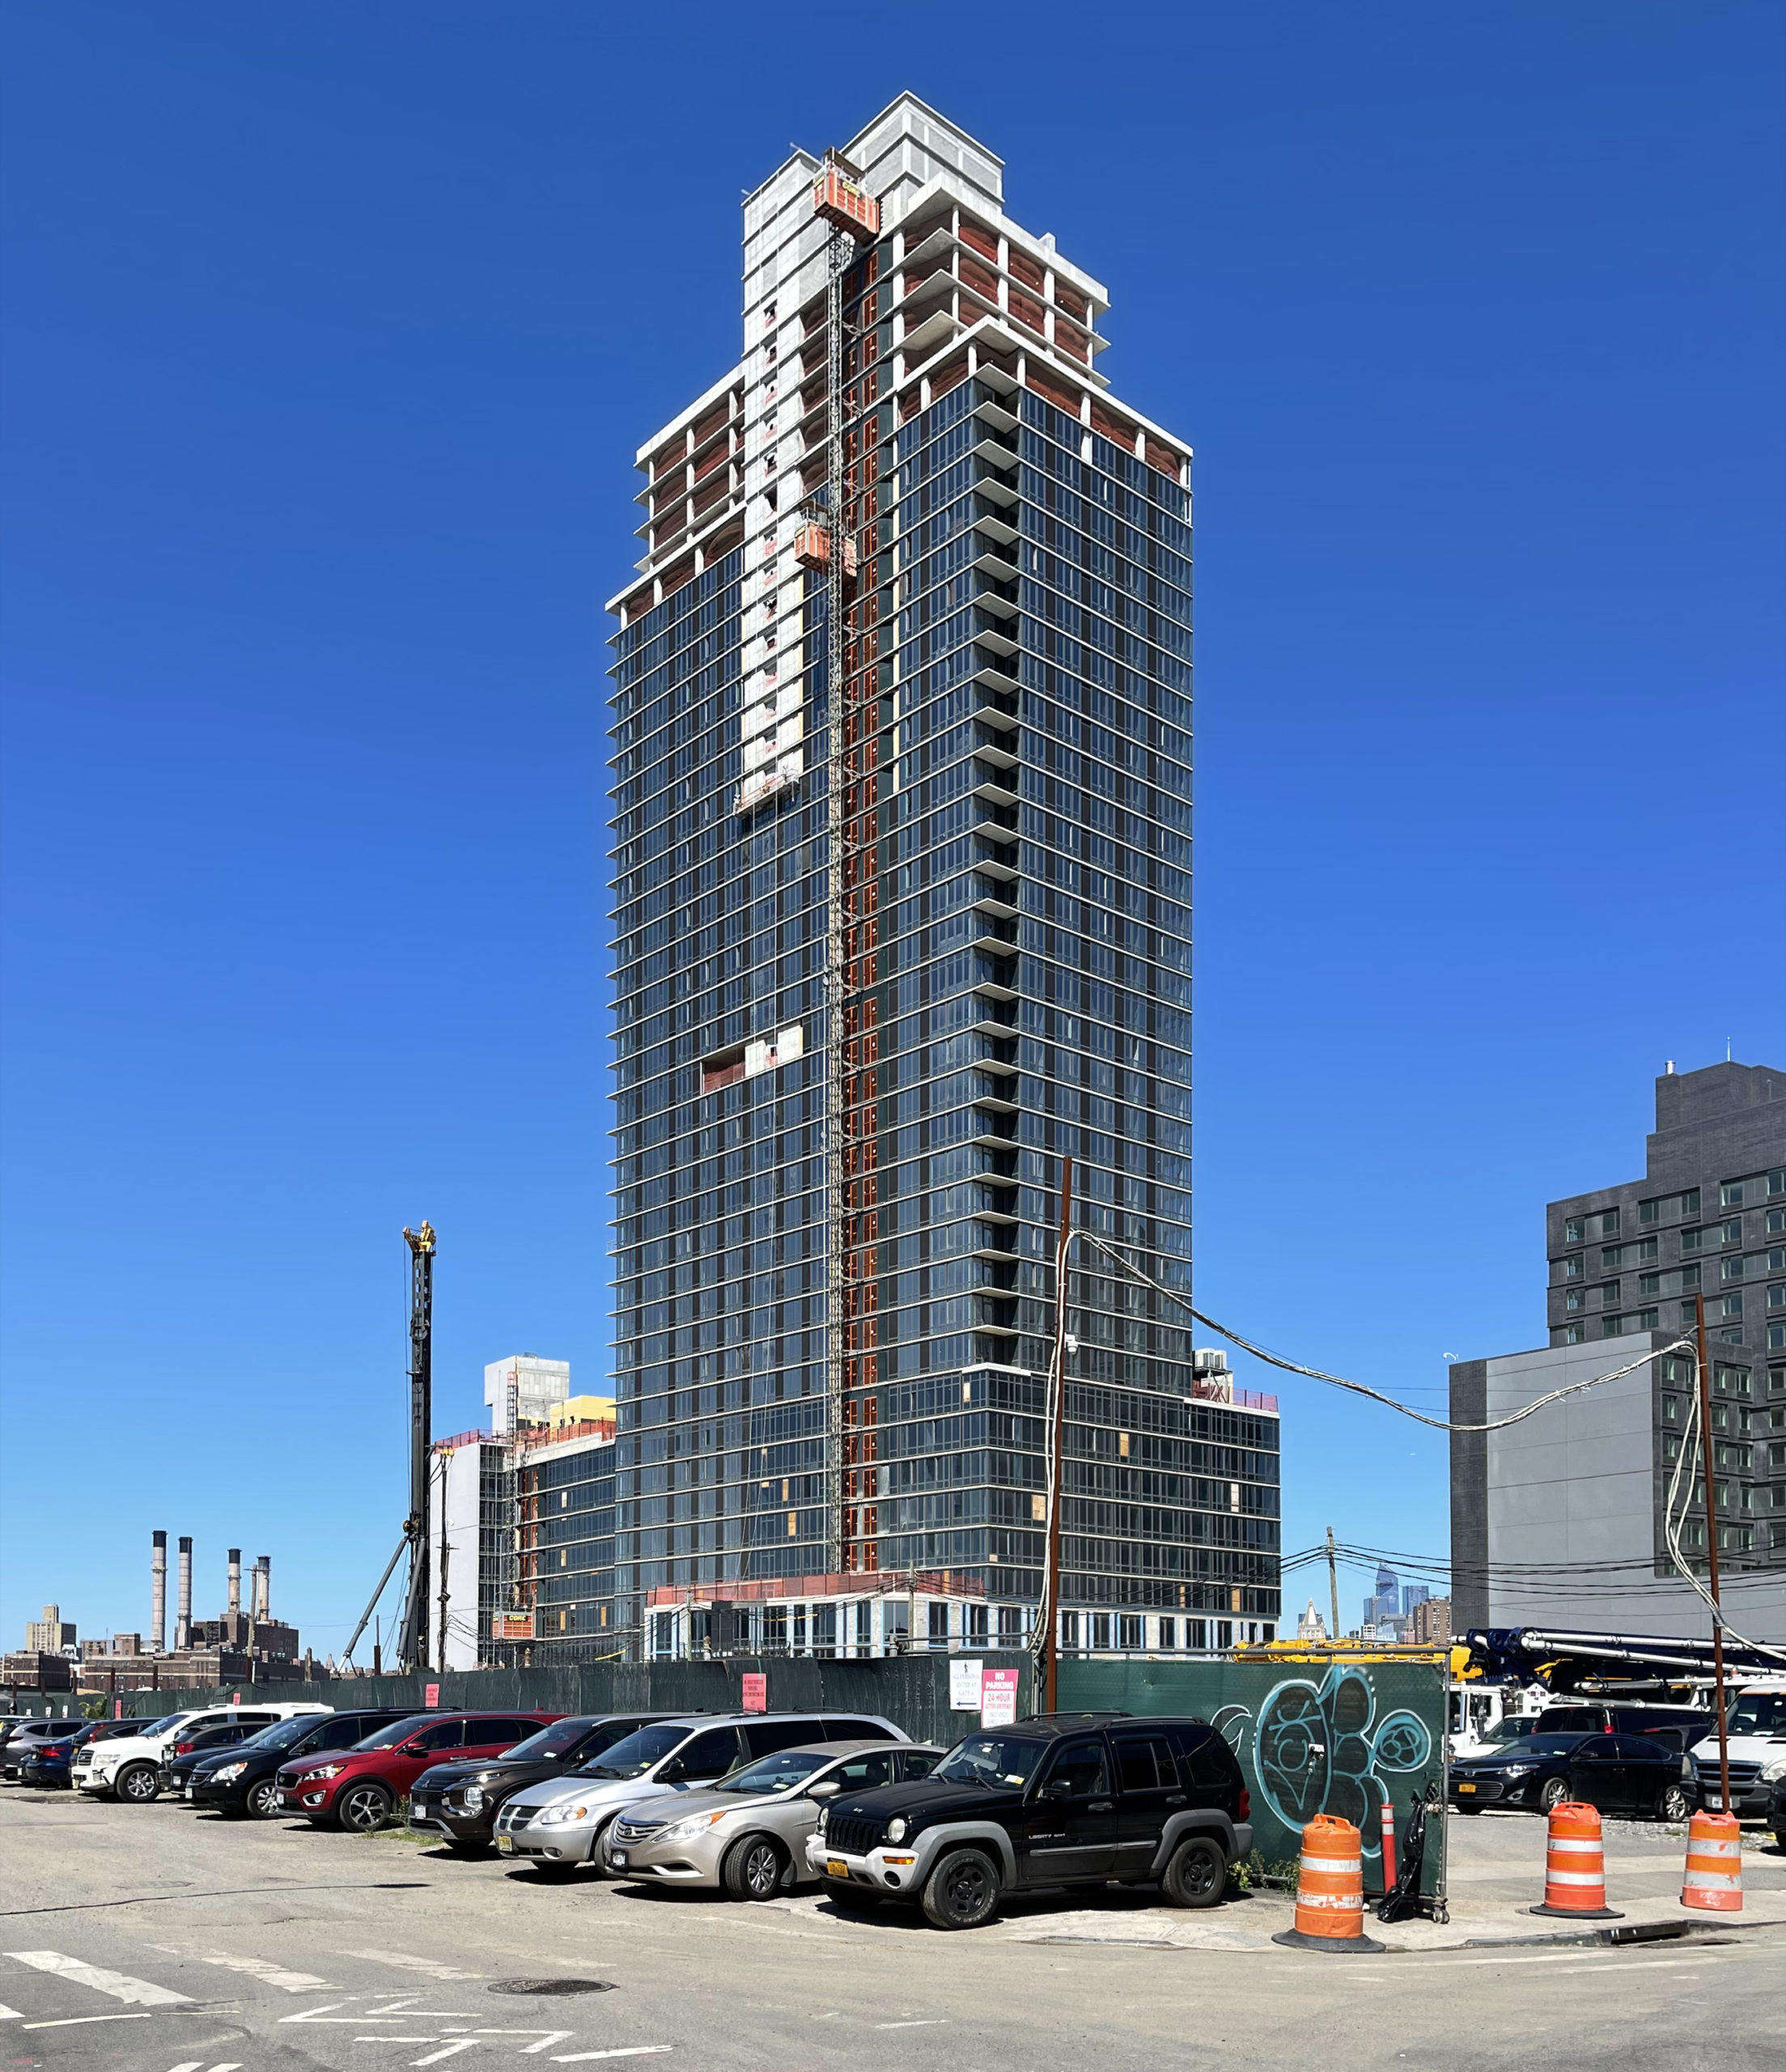 65 Private Drive's Curtain Wall Nears 40-Story Parapet at Calyer Place in Greenpoint, Brooklyn - New York YIMBY